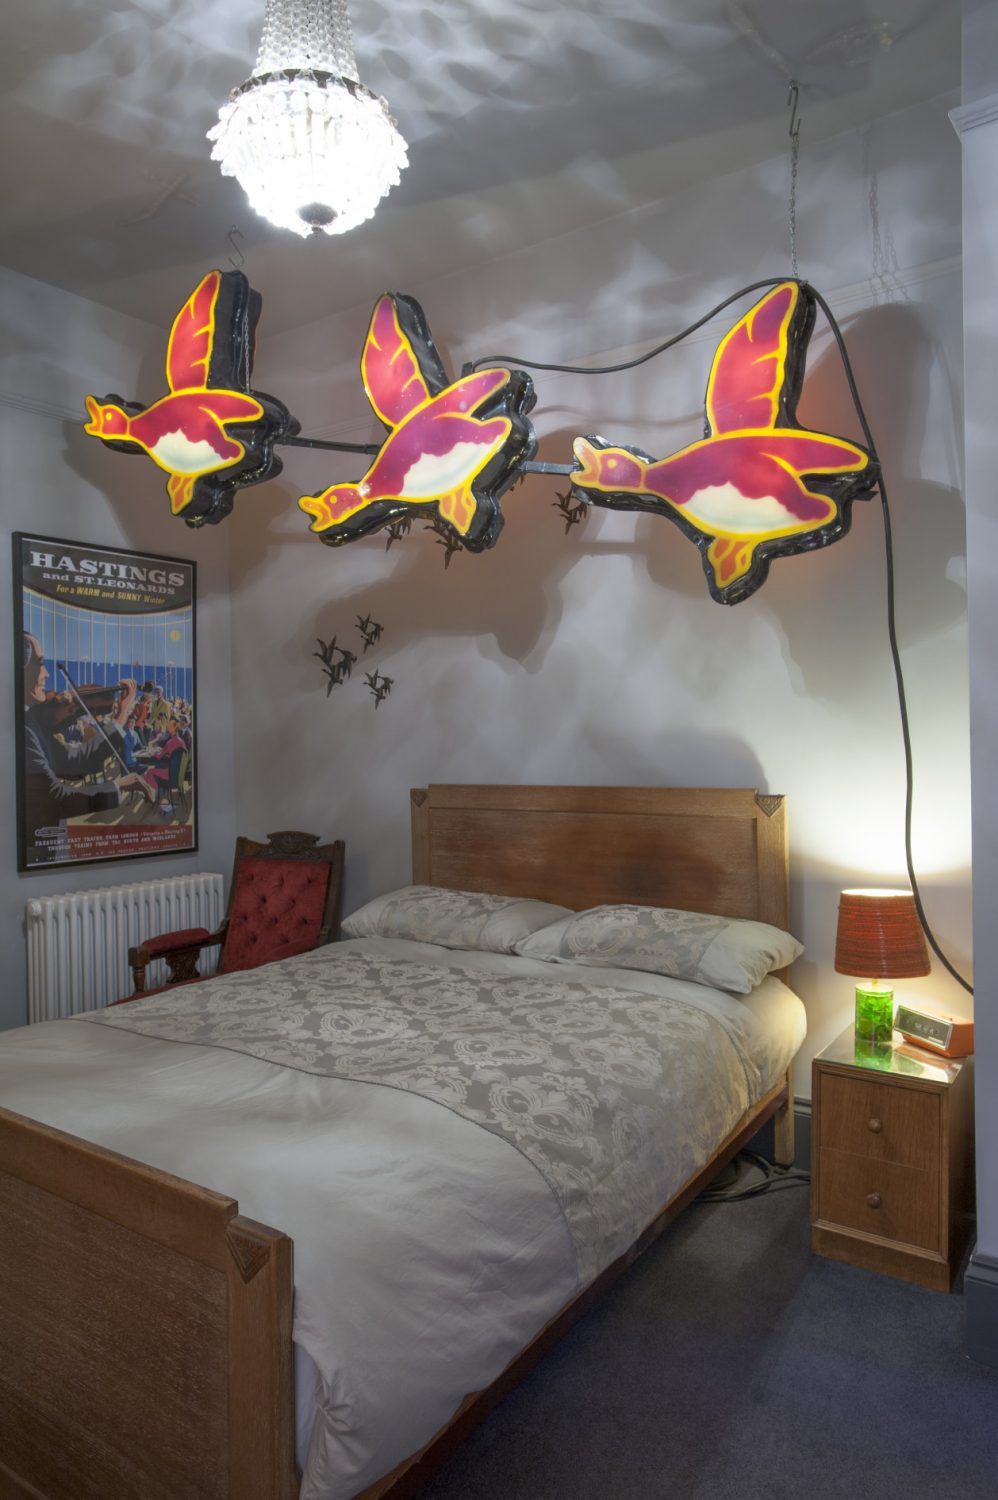 Next to the sitting room, in the first of two guest bedrooms, Philip’s passion for Blackpool Illuminations is again given full reign in the shape of three spectacular flying ducks